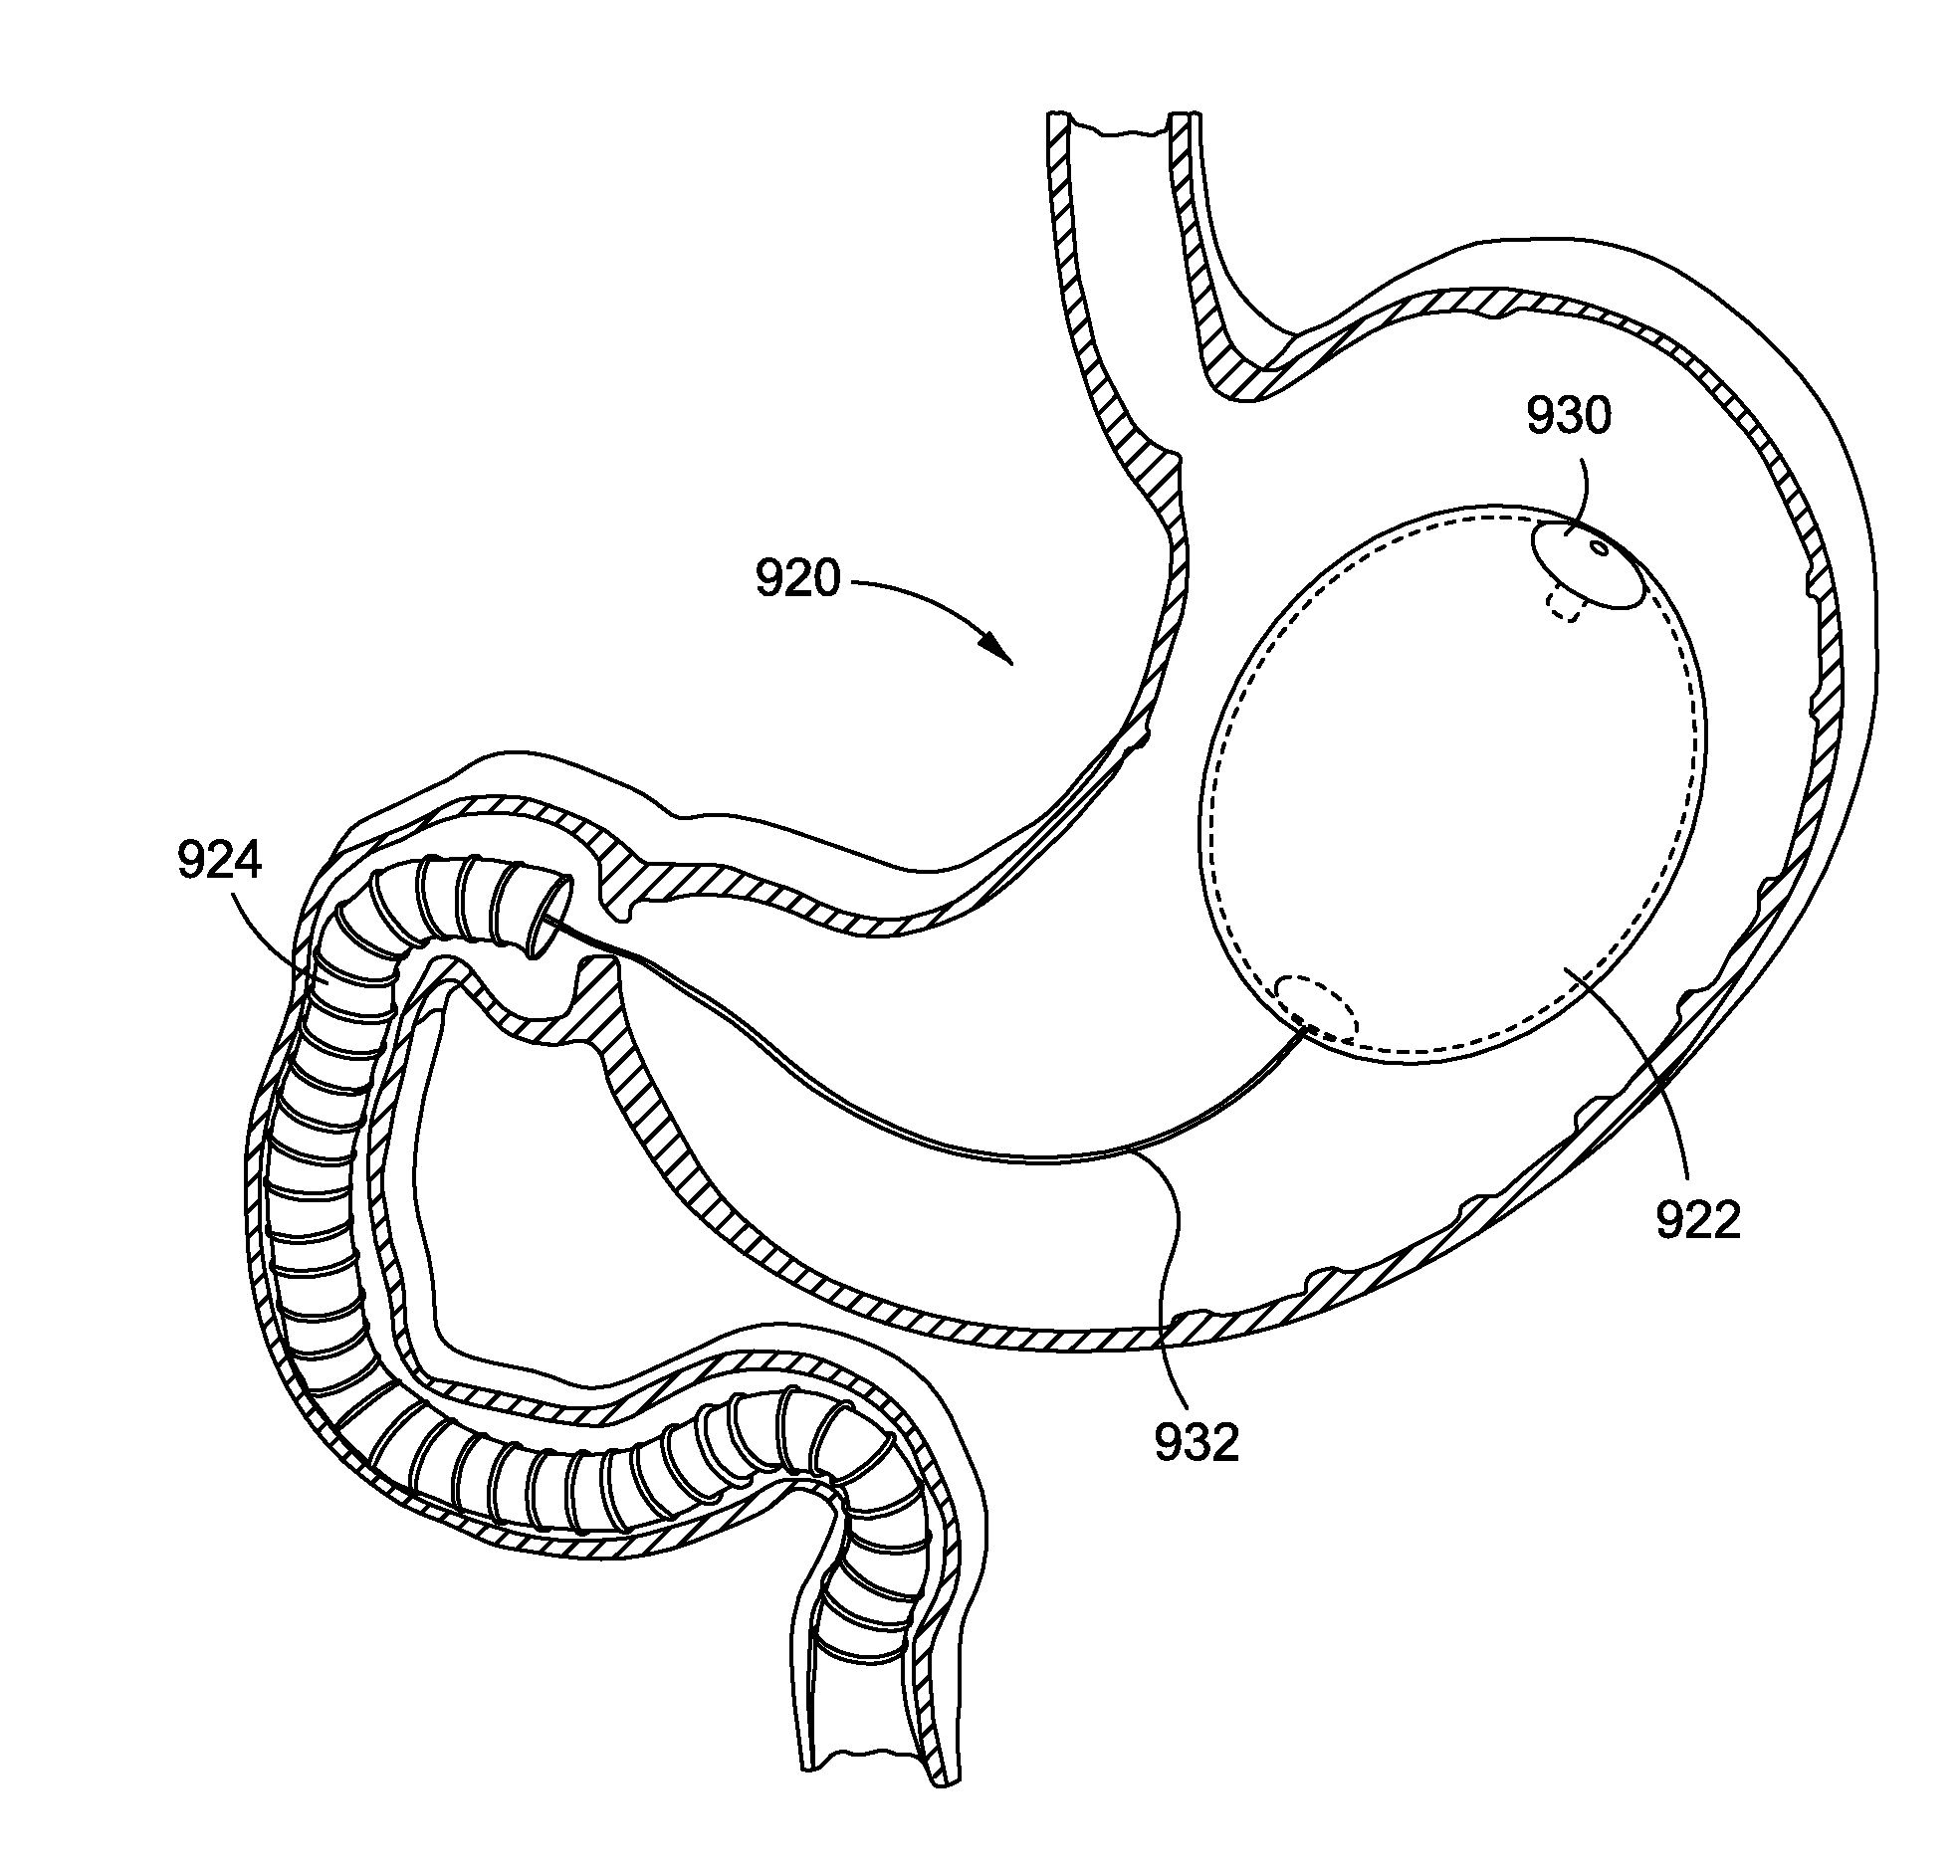 Intragastric implants with duodenal anchors